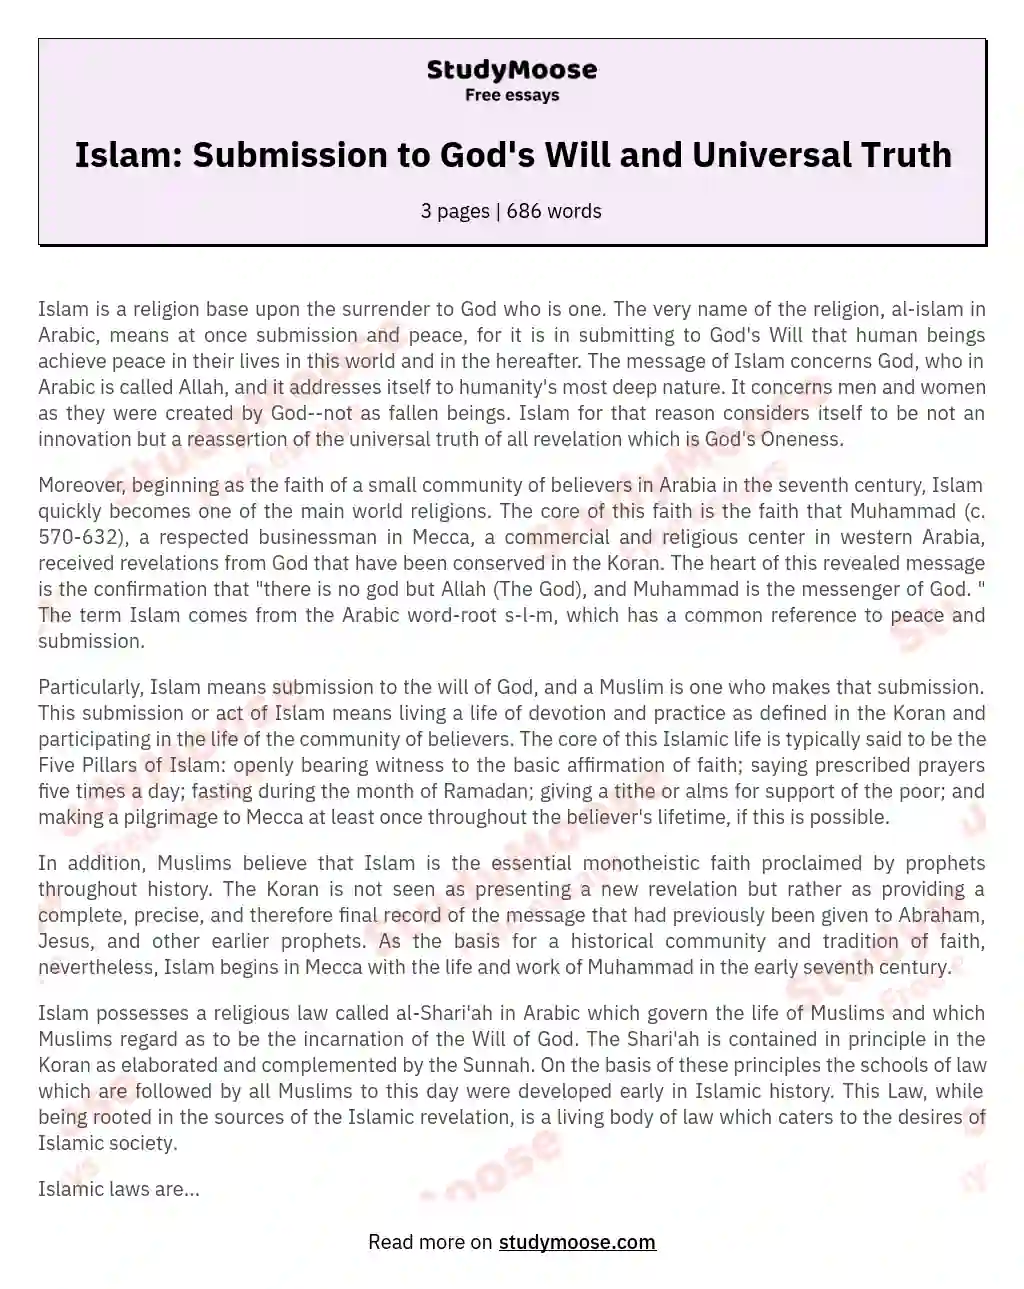 Islam: Submission to God's Will and Universal Truth essay